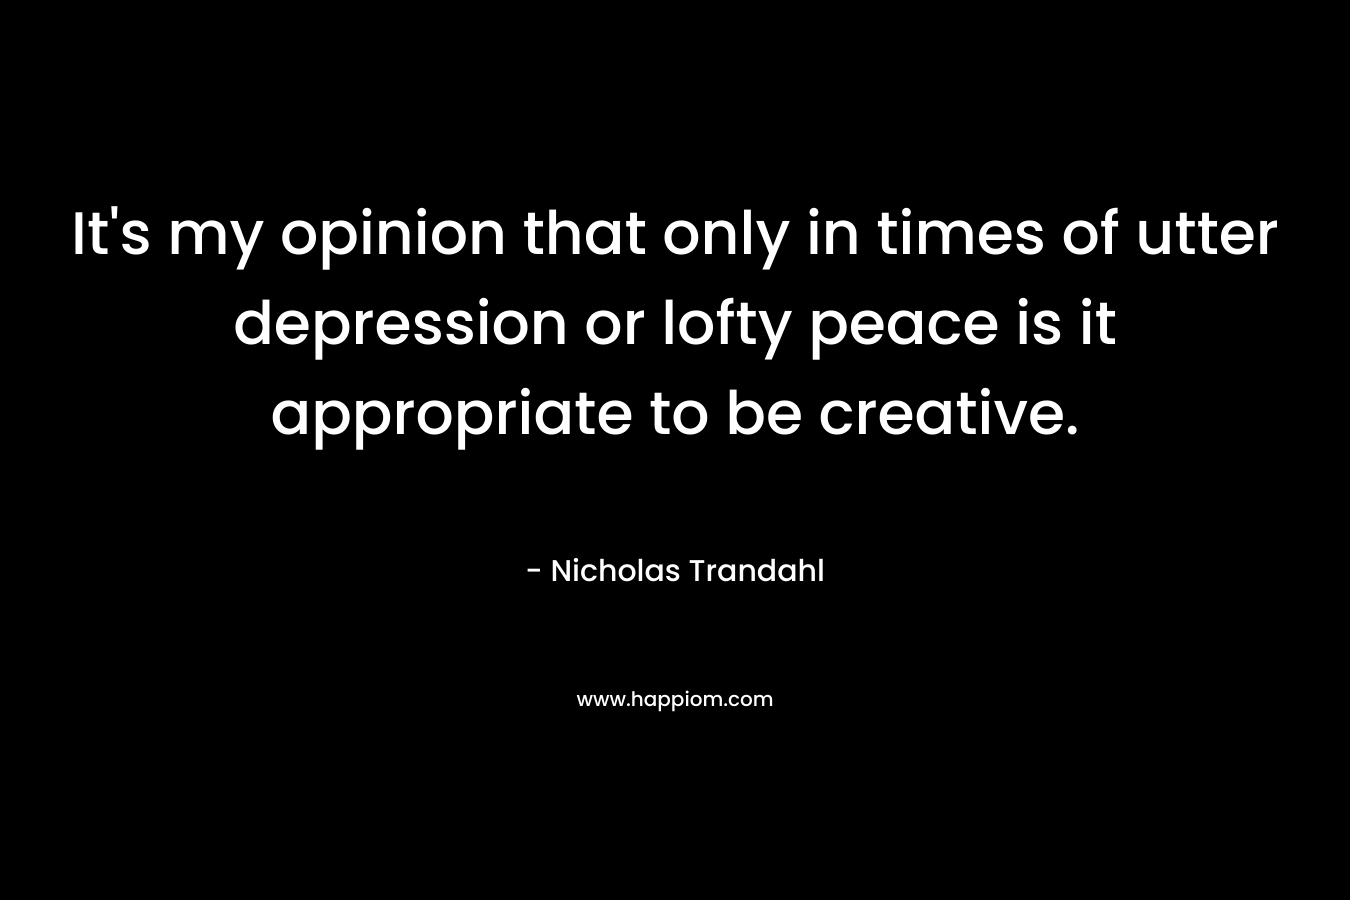 It’s my opinion that only in times of utter depression or lofty peace is it appropriate to be creative. – Nicholas Trandahl